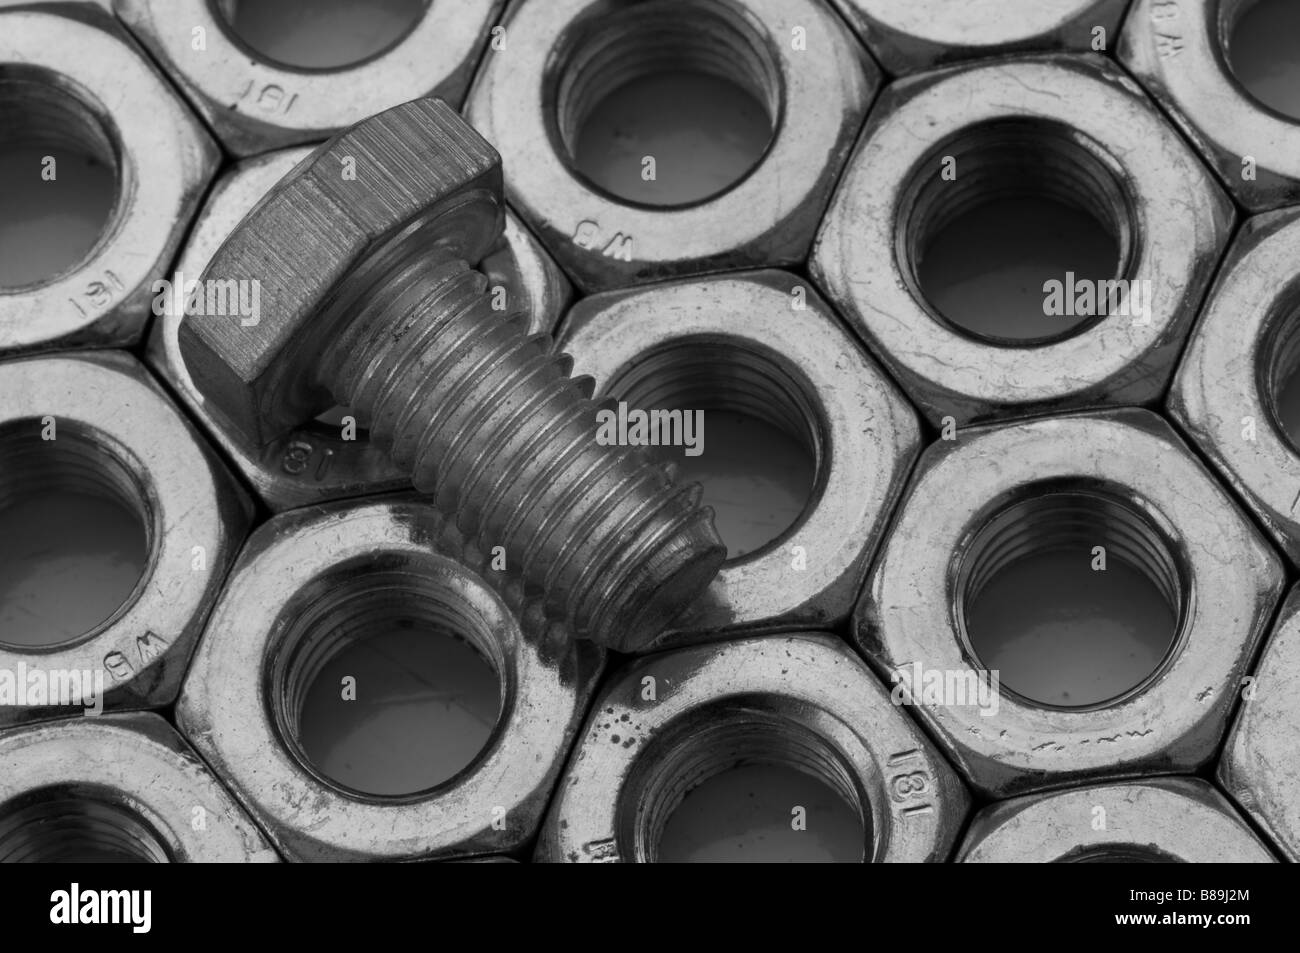 Nuts and Bolt Stock Photo